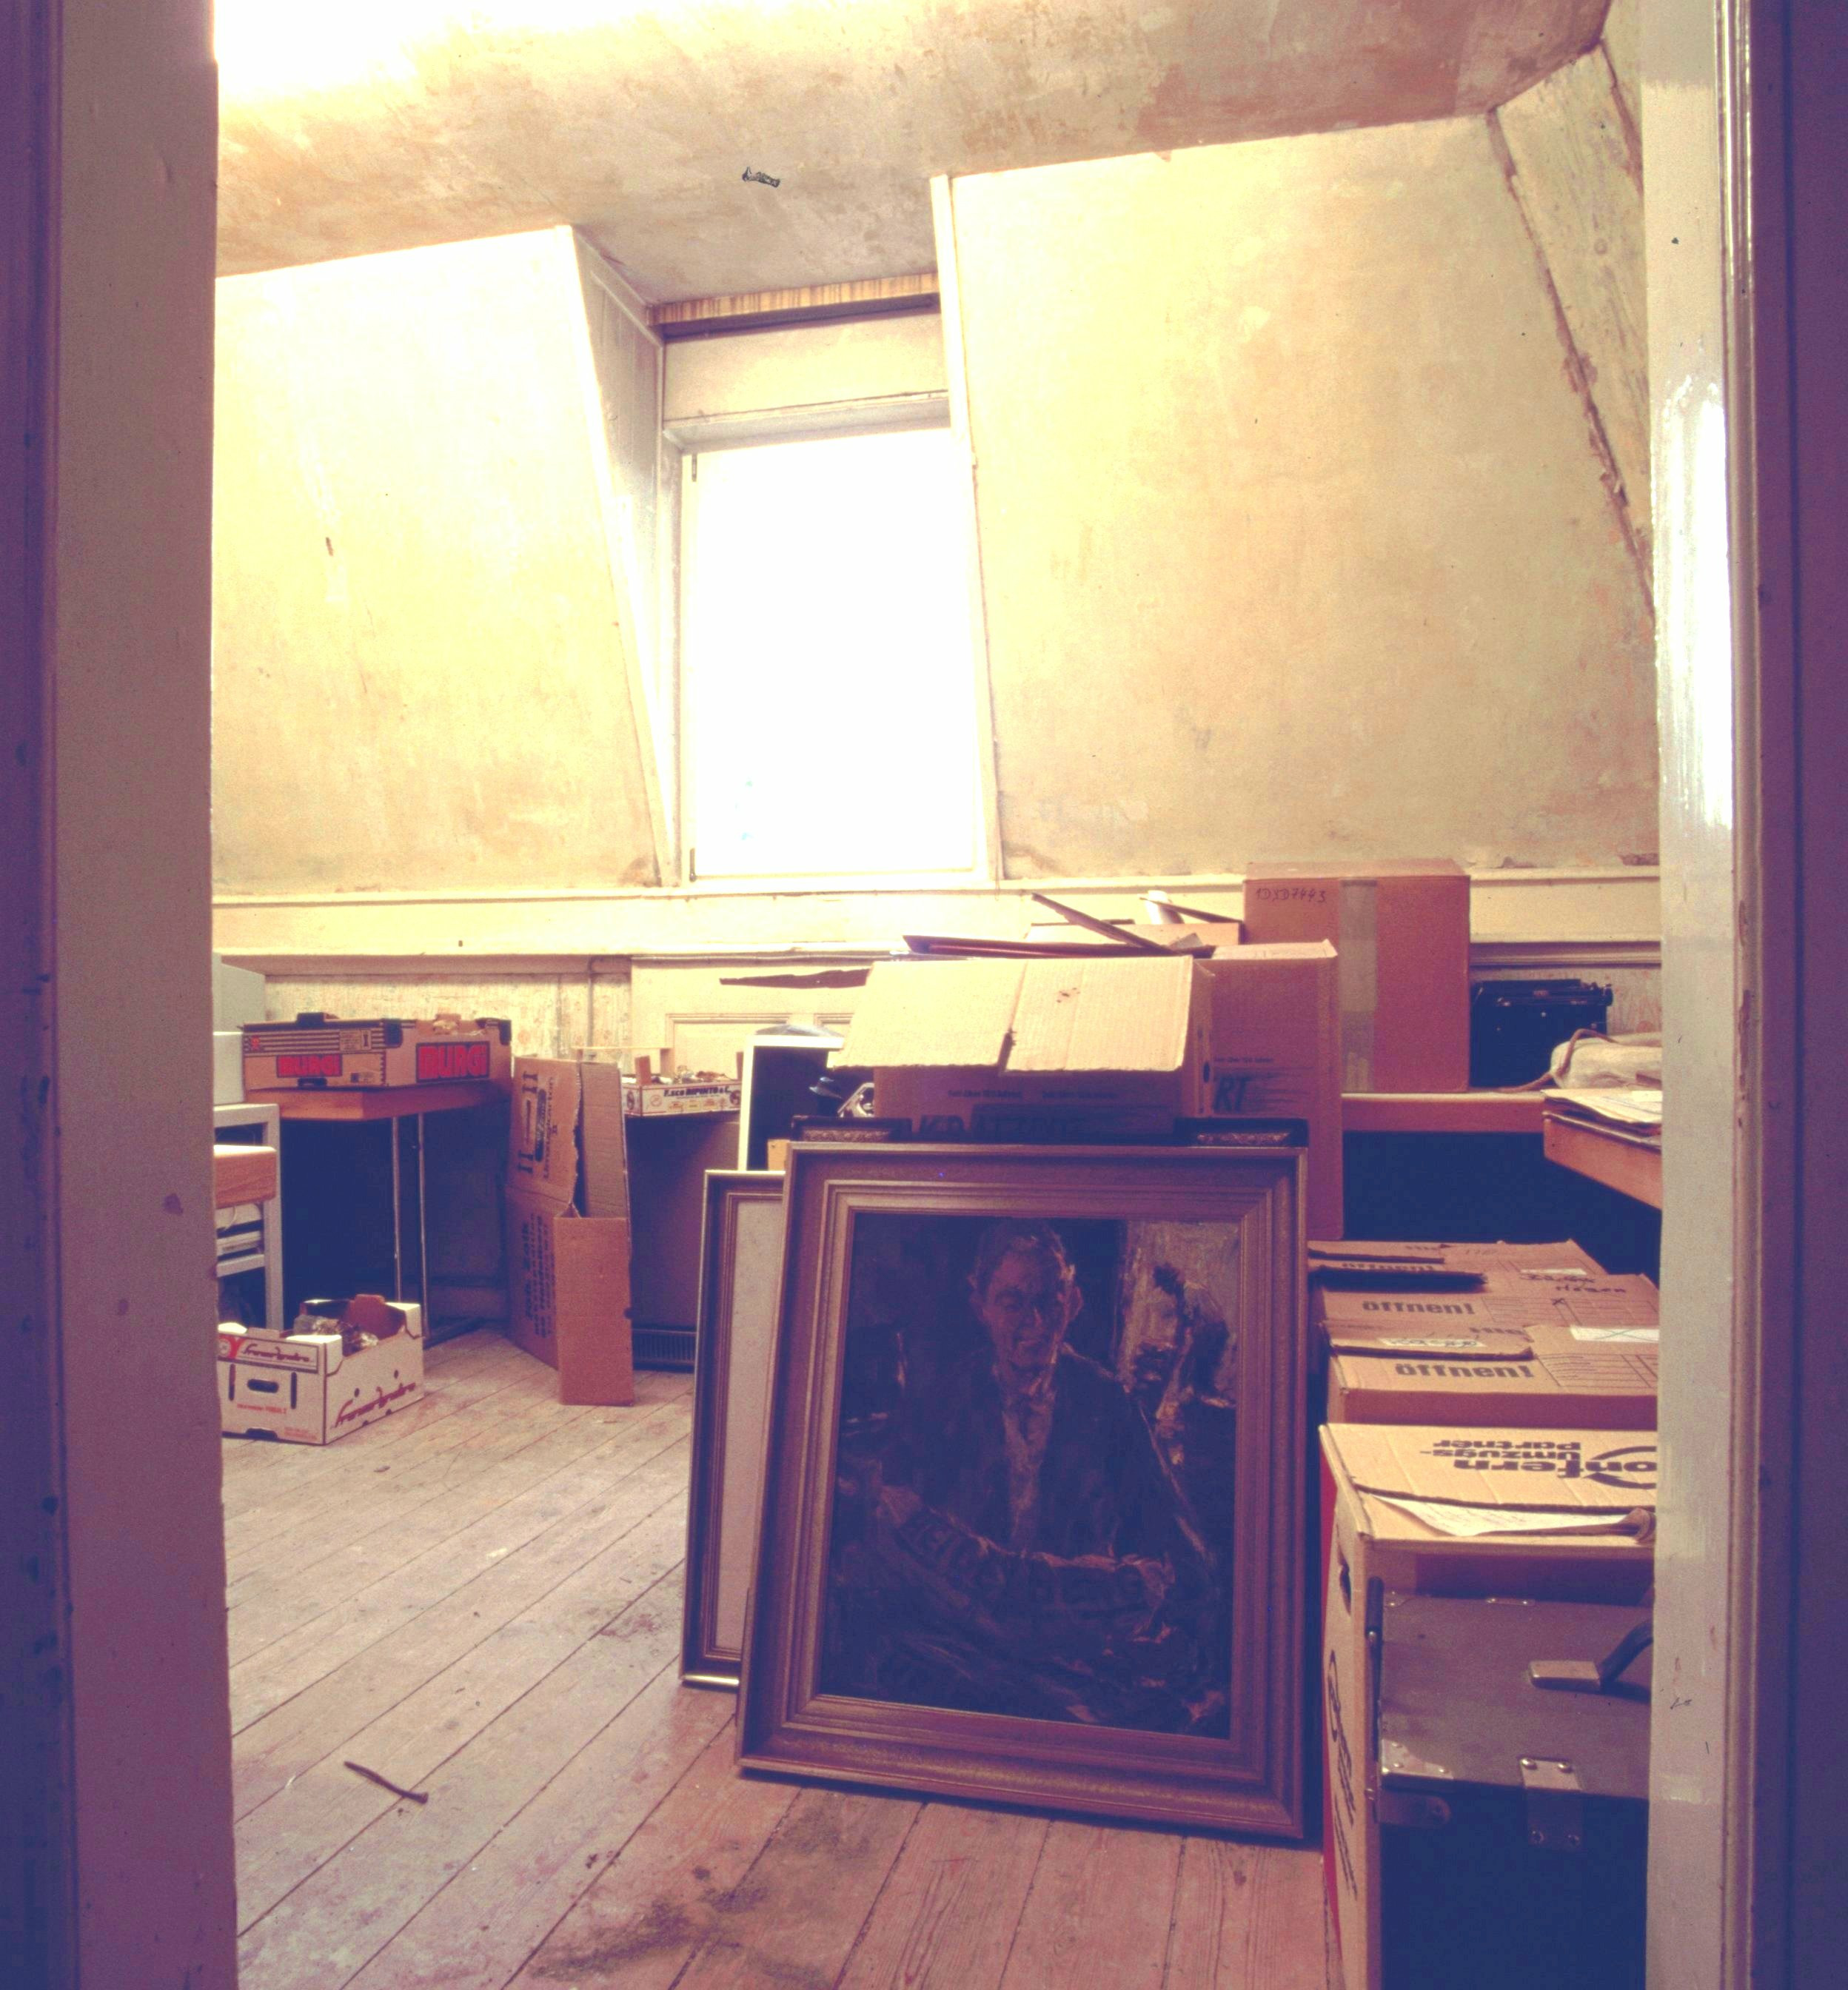 Bare room with wooden floor, in which boxes and framed pictures stand